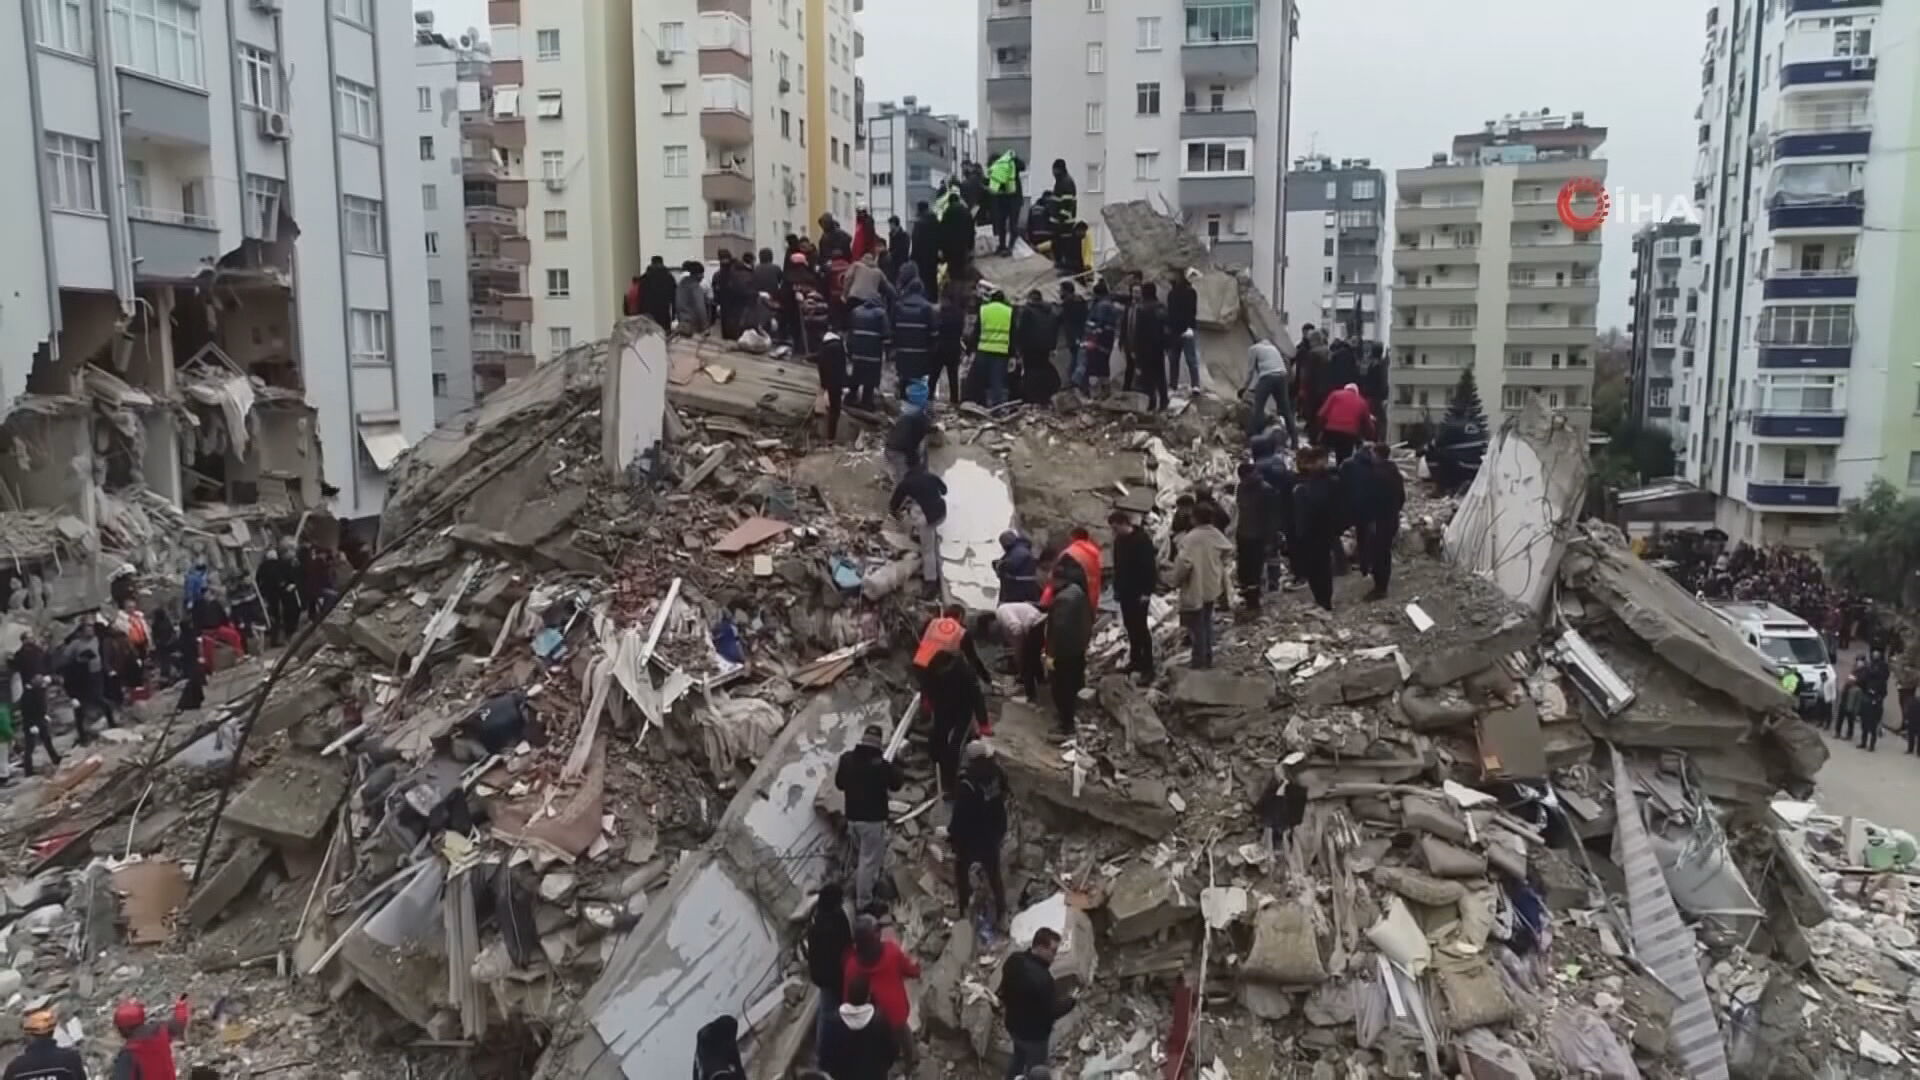 More than 2,000 have been killed and thousands more injured in the earthquake.